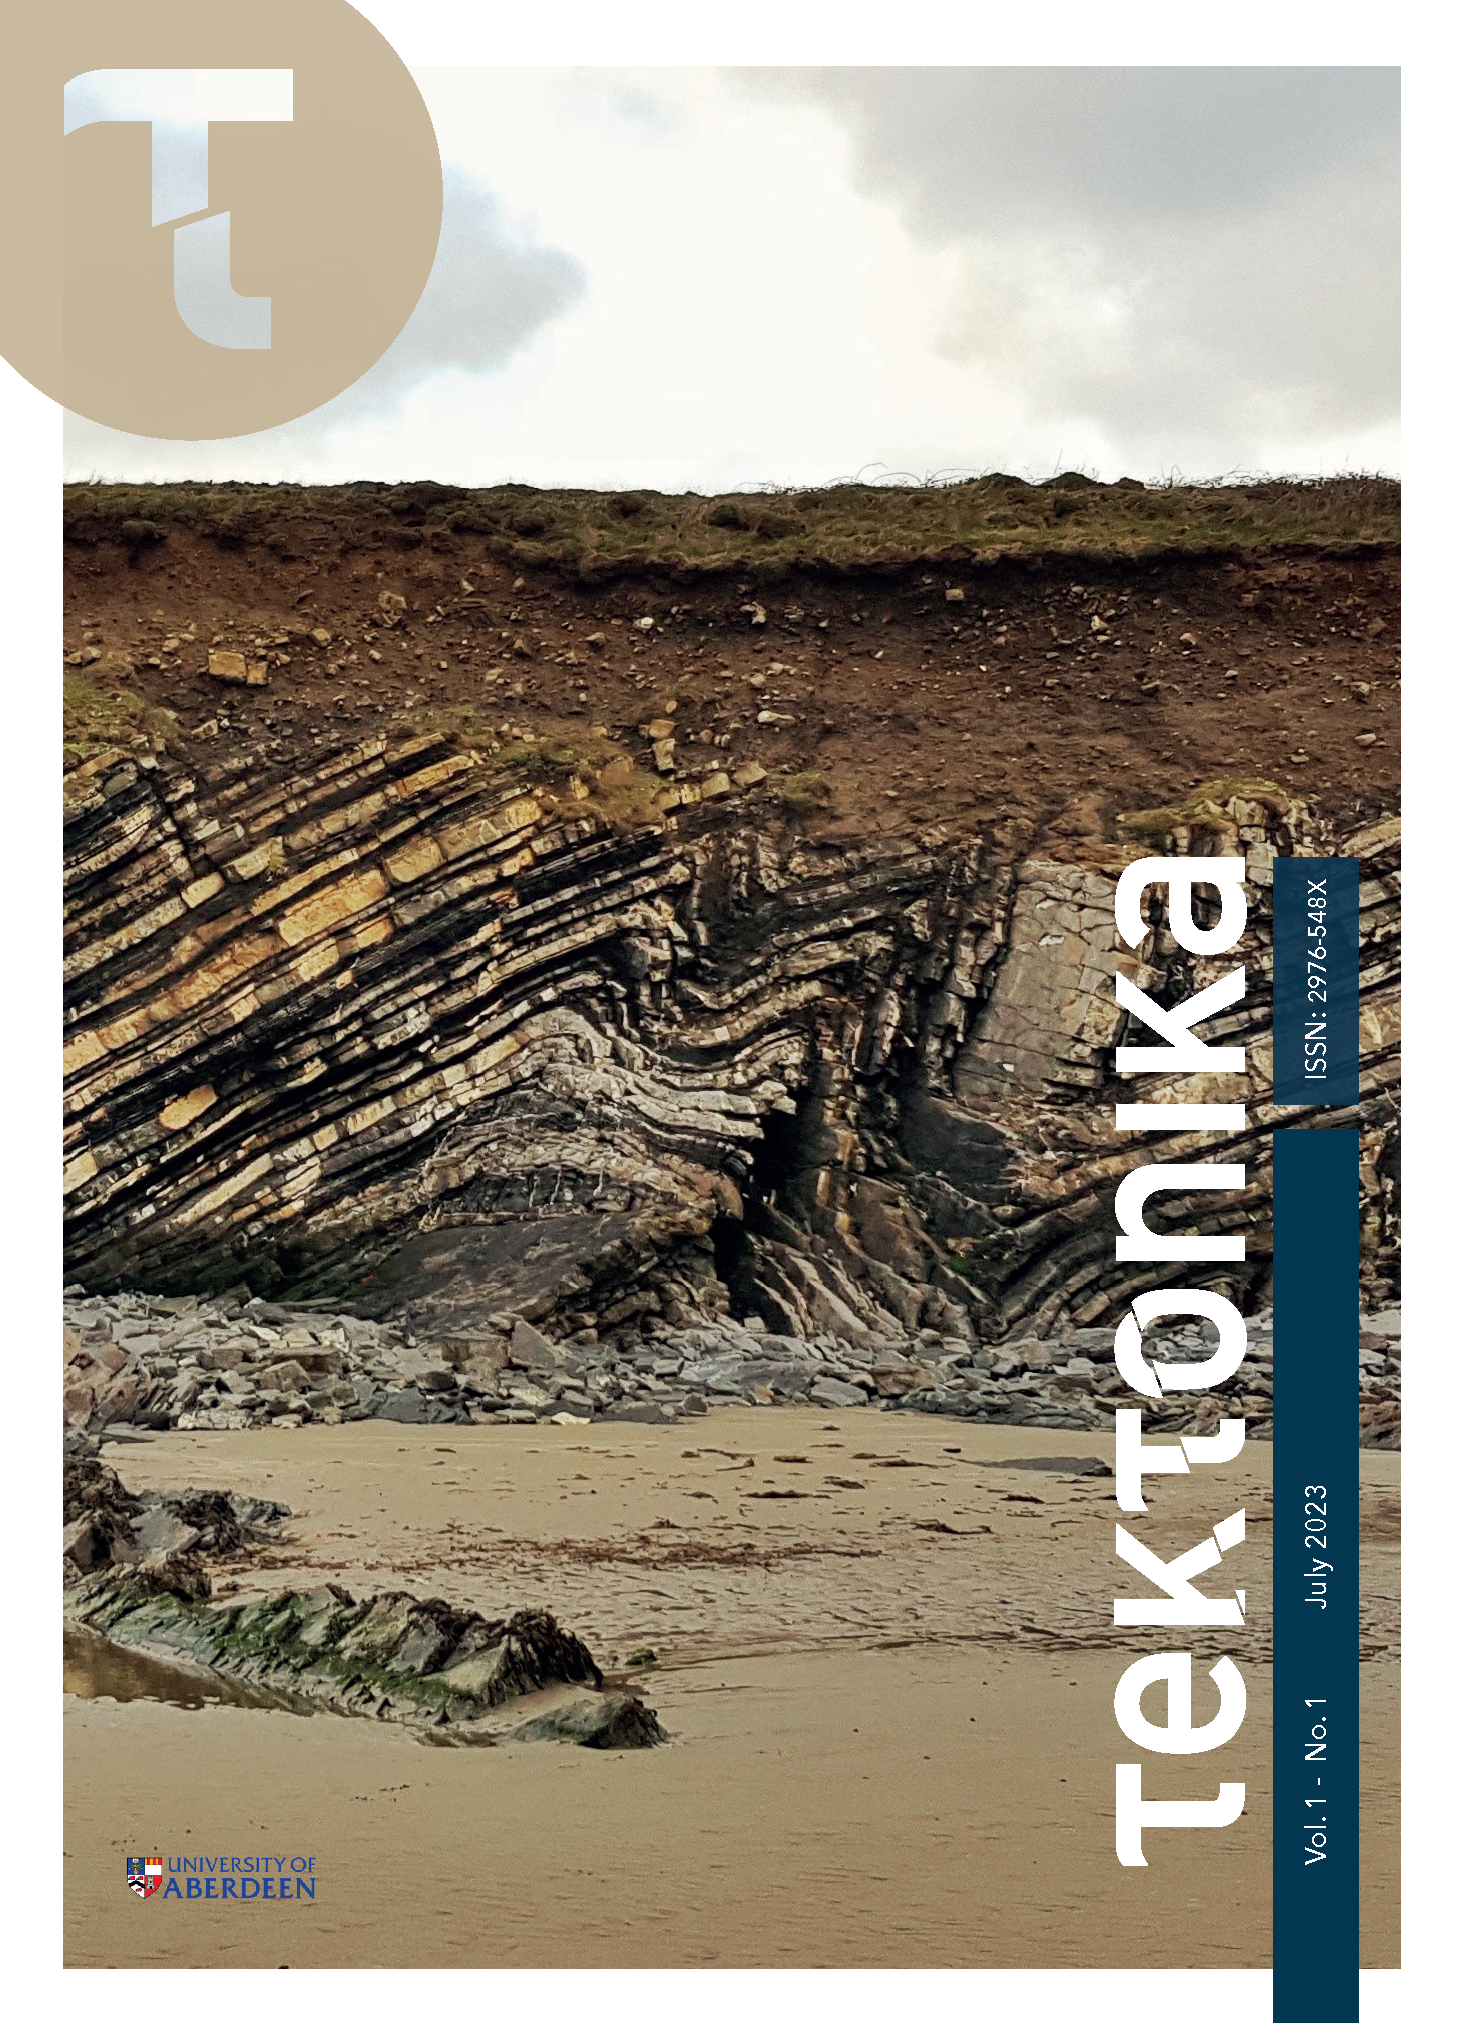 Cover image by Conor O’Sullivan: Chevon folds in the Loughshinny Formation from Loughshinny Bay, north Co. Dublin. These Carboniferous limestones and mudstones were initially deposited in the Dublin Basin before being deformed during the Variscan Orogeny. A sharp unconformity separates these Carboniferous rocks from the overlying glacial deposits of the Dublin Boulder Clay, deposited during the Quaternary.